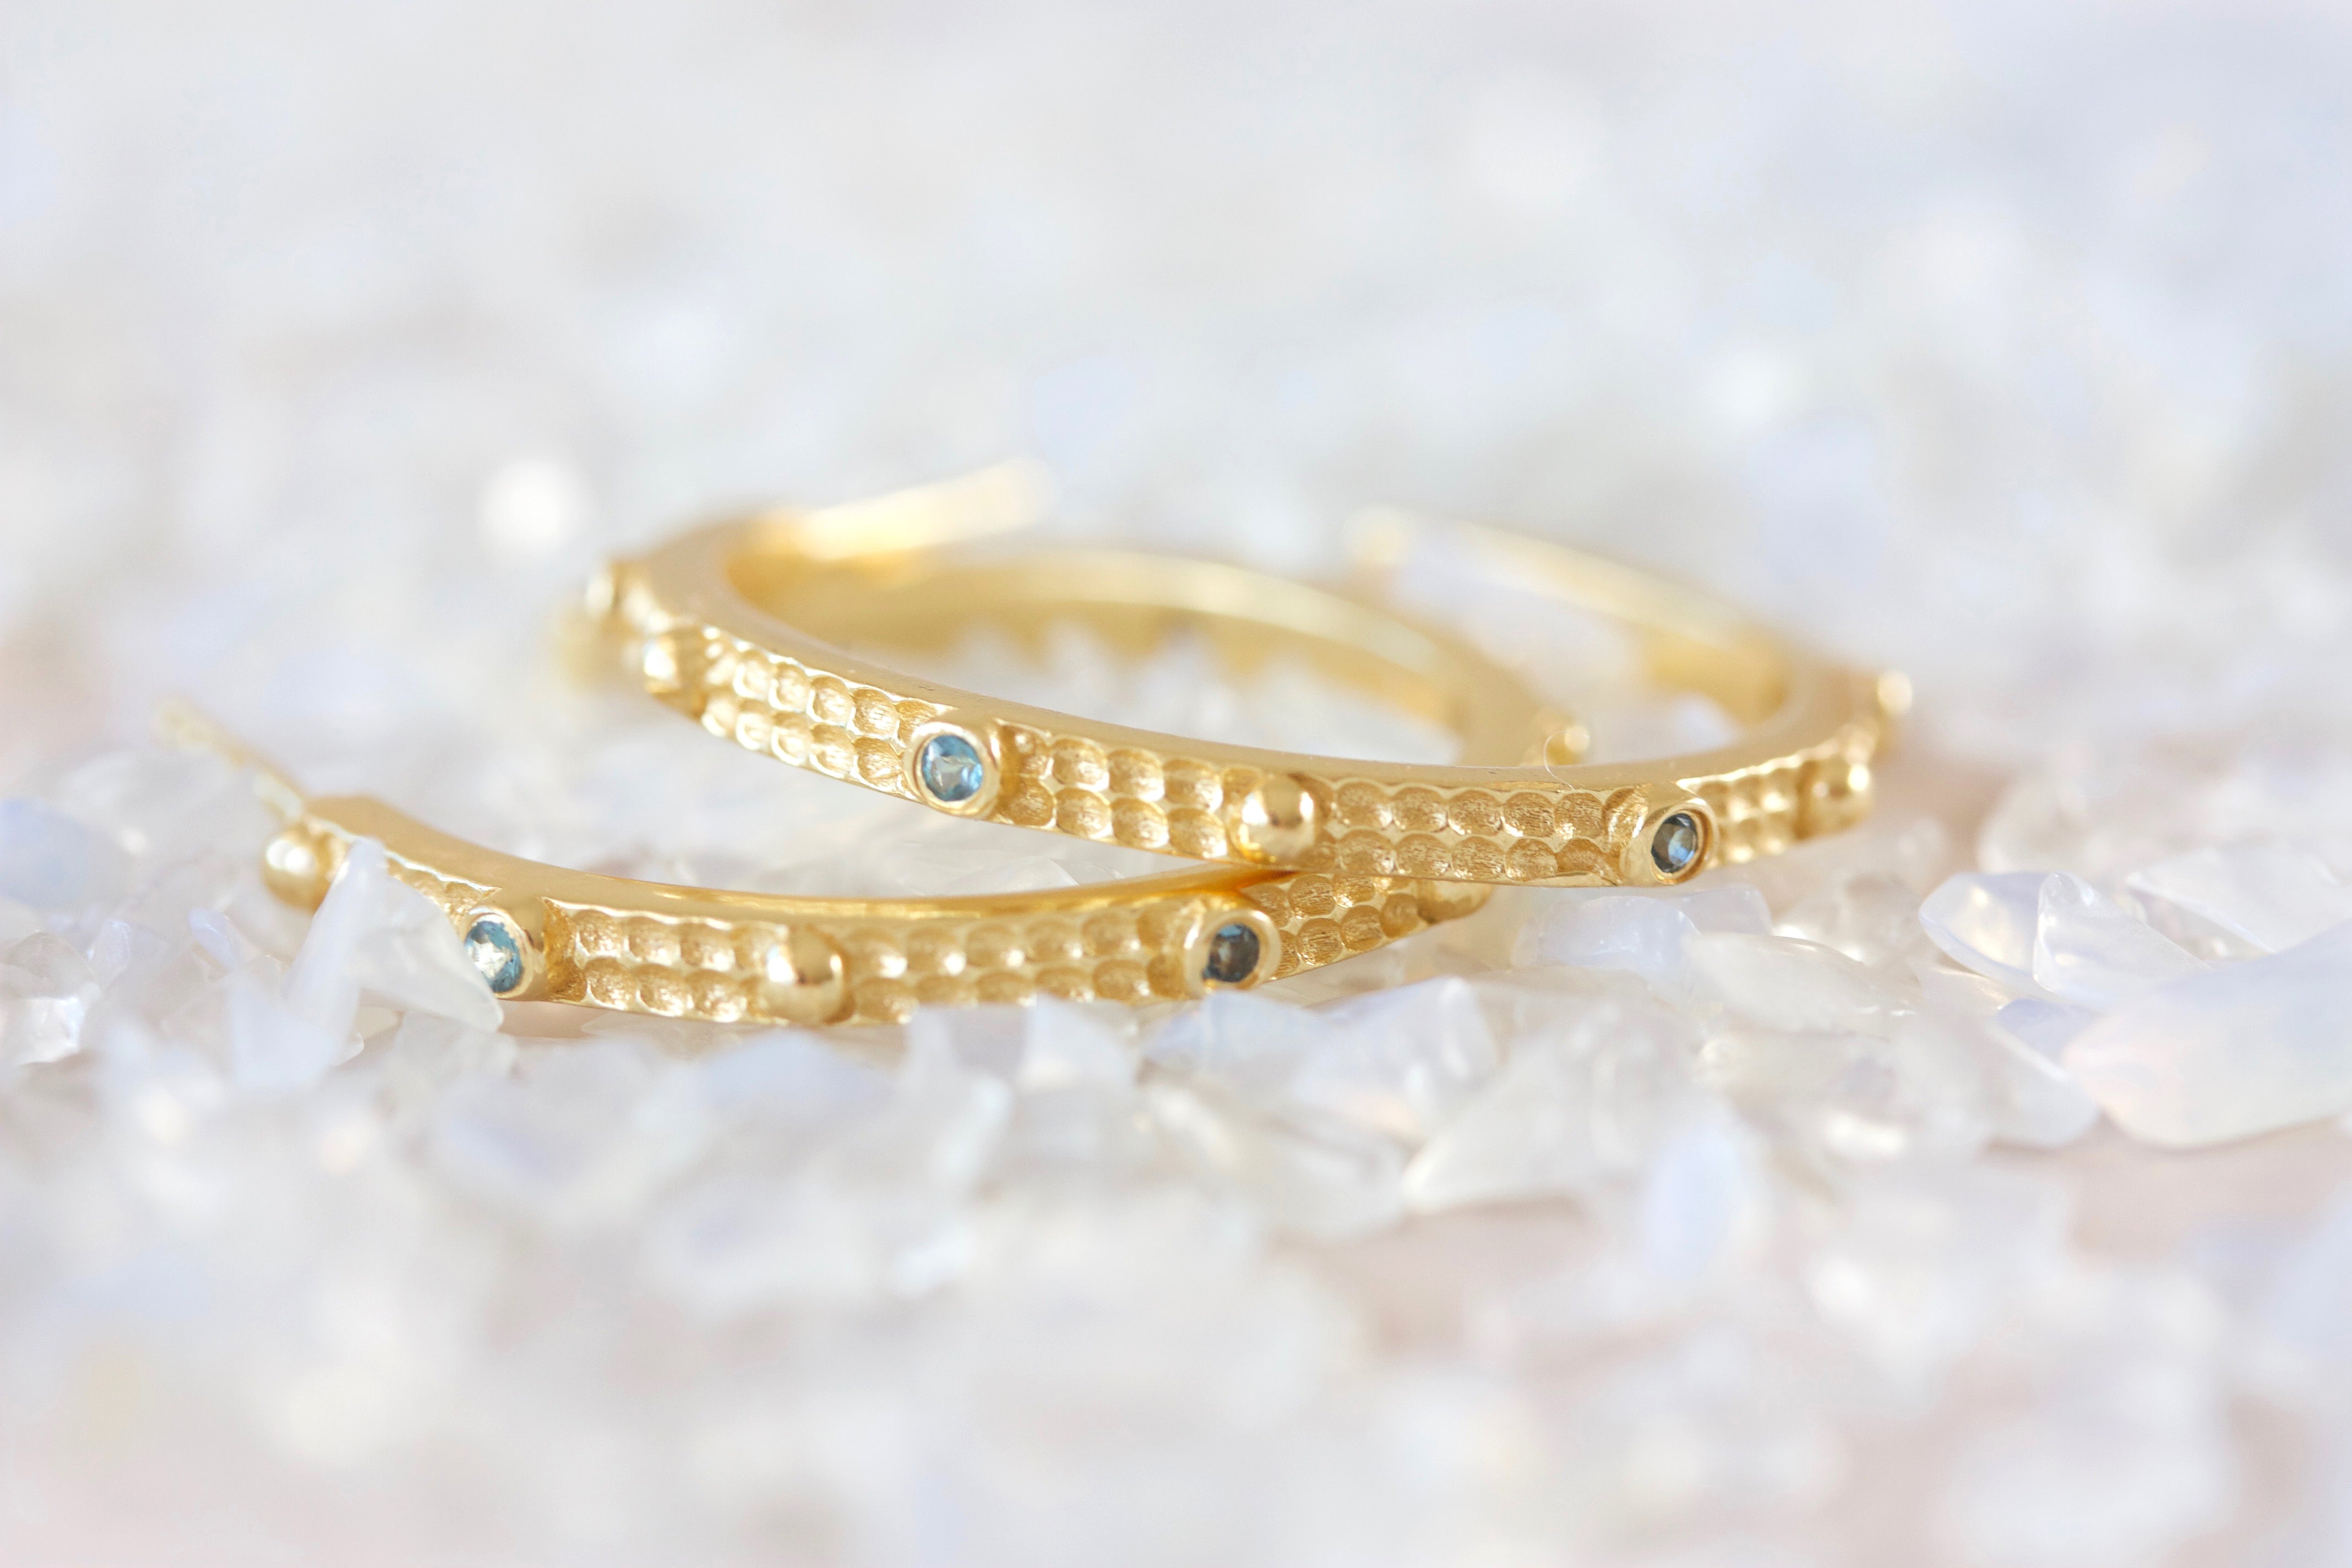 gold large hoop earrings with blue crystals